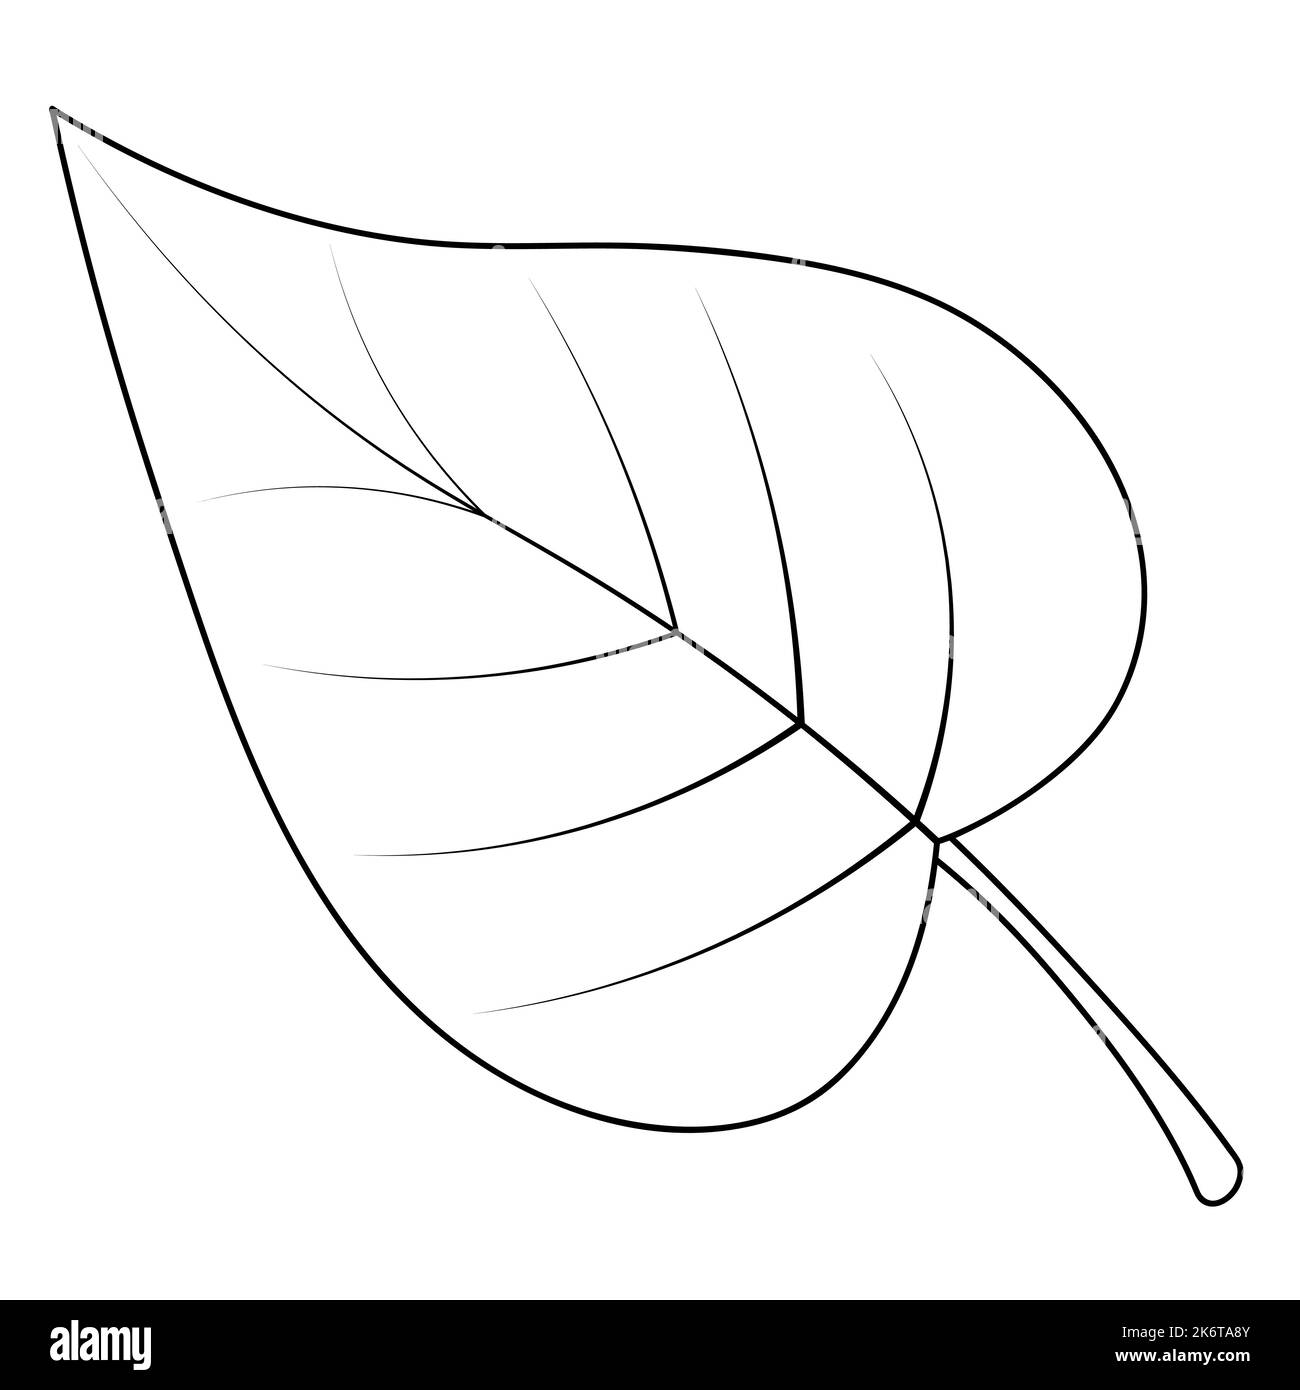 Poplar leaf. Part of the tree with veins. Vector illustration. Outline on an isolated white background. Doodle style. Sketch. Coloring book Stock Vector